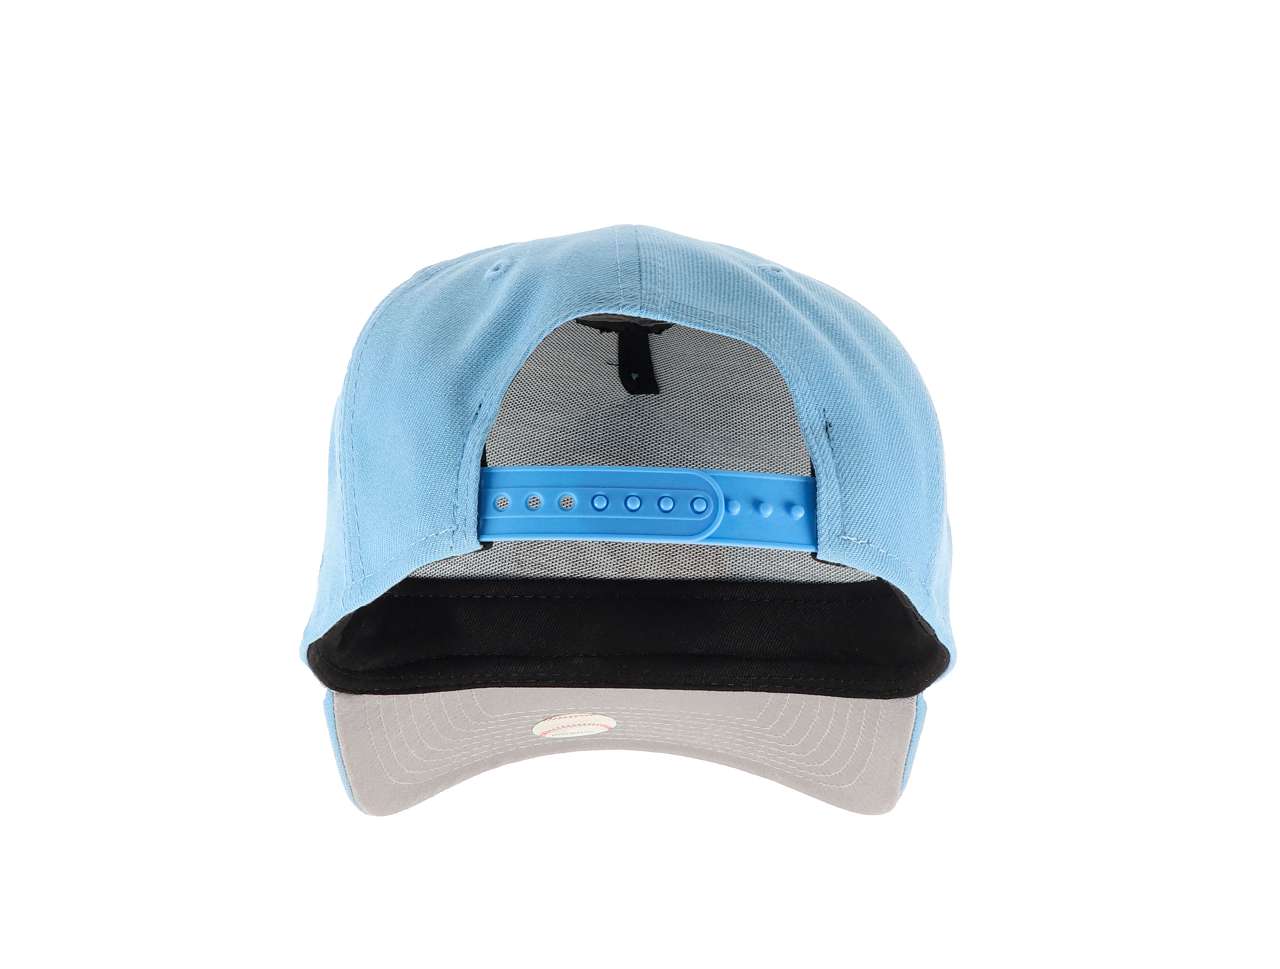 San Francisco Giants MLB Cooperstown Sky Blue 9Forty A-Frame Snapback Cap New Era